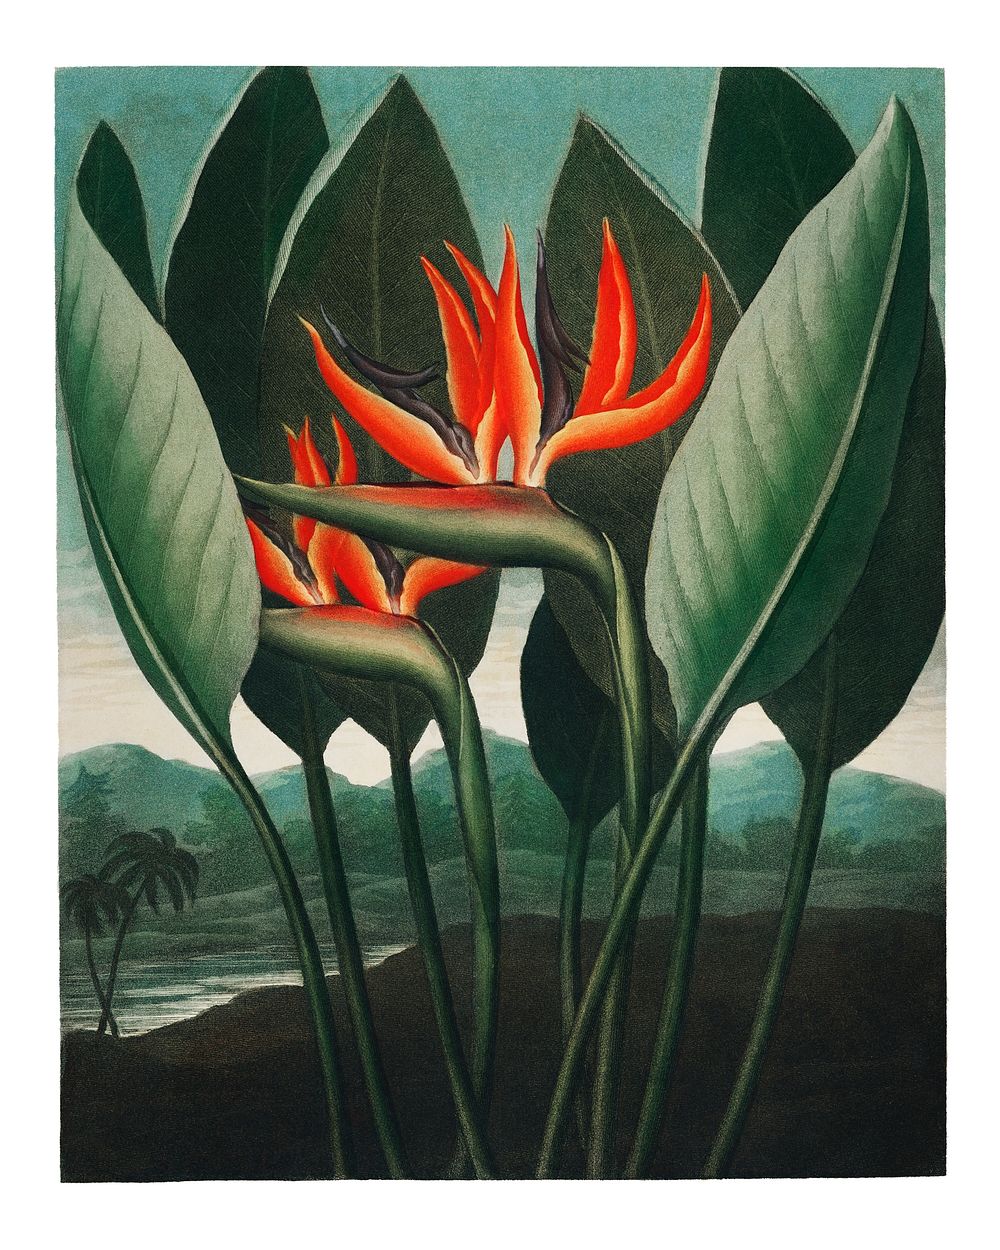 Bird of paradise flowers vintage illustration wall art print and poster design remix from the original artwork.